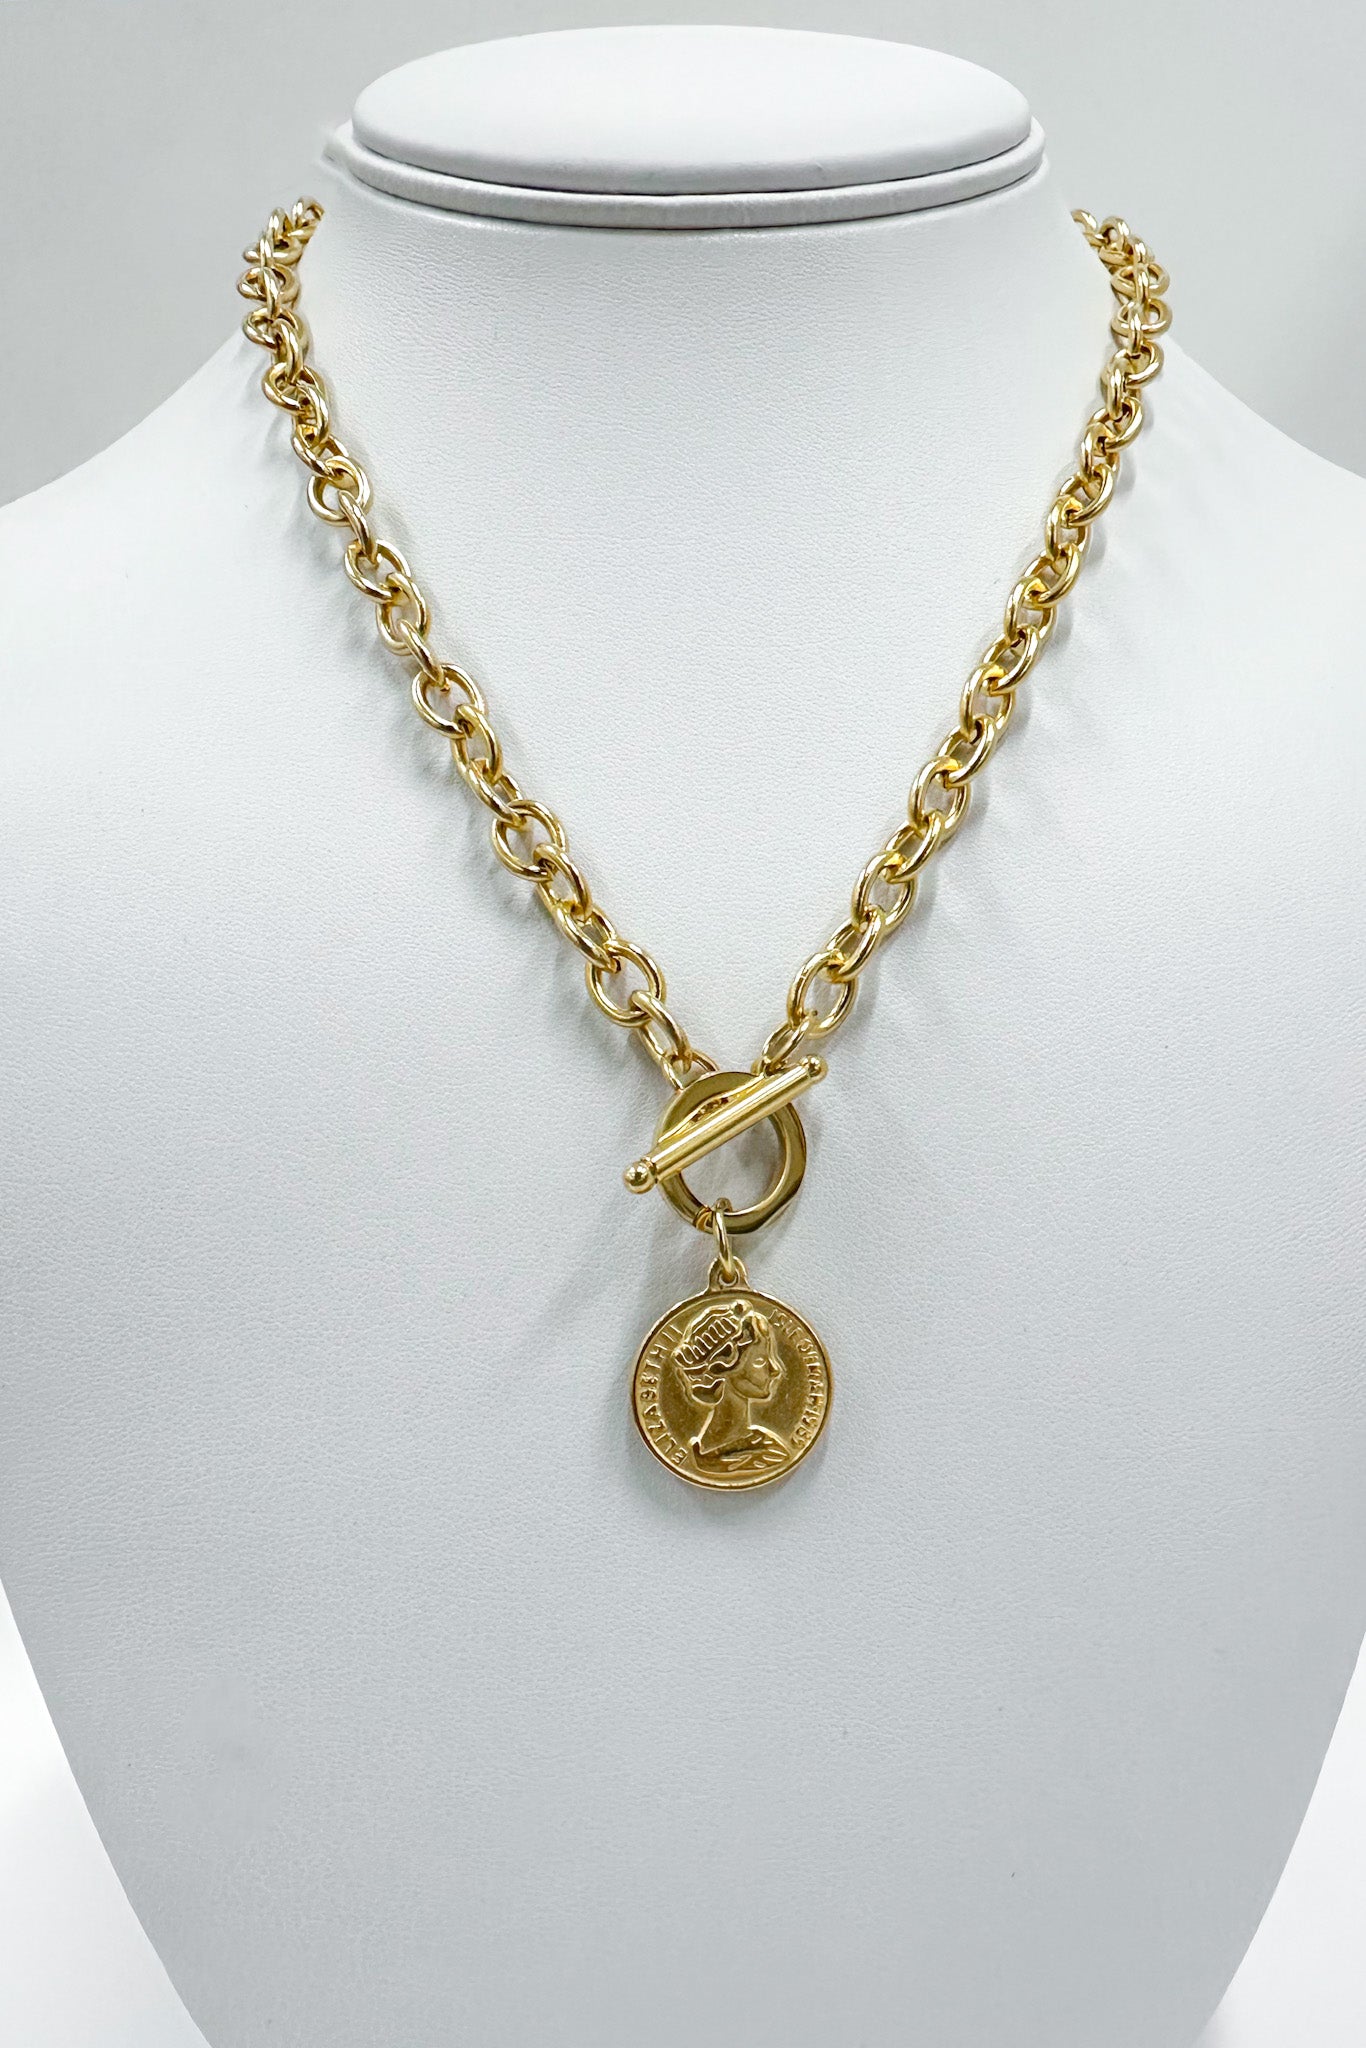 Gold Mairi Toggle Chain Coin Necklace - Madison and Mallory